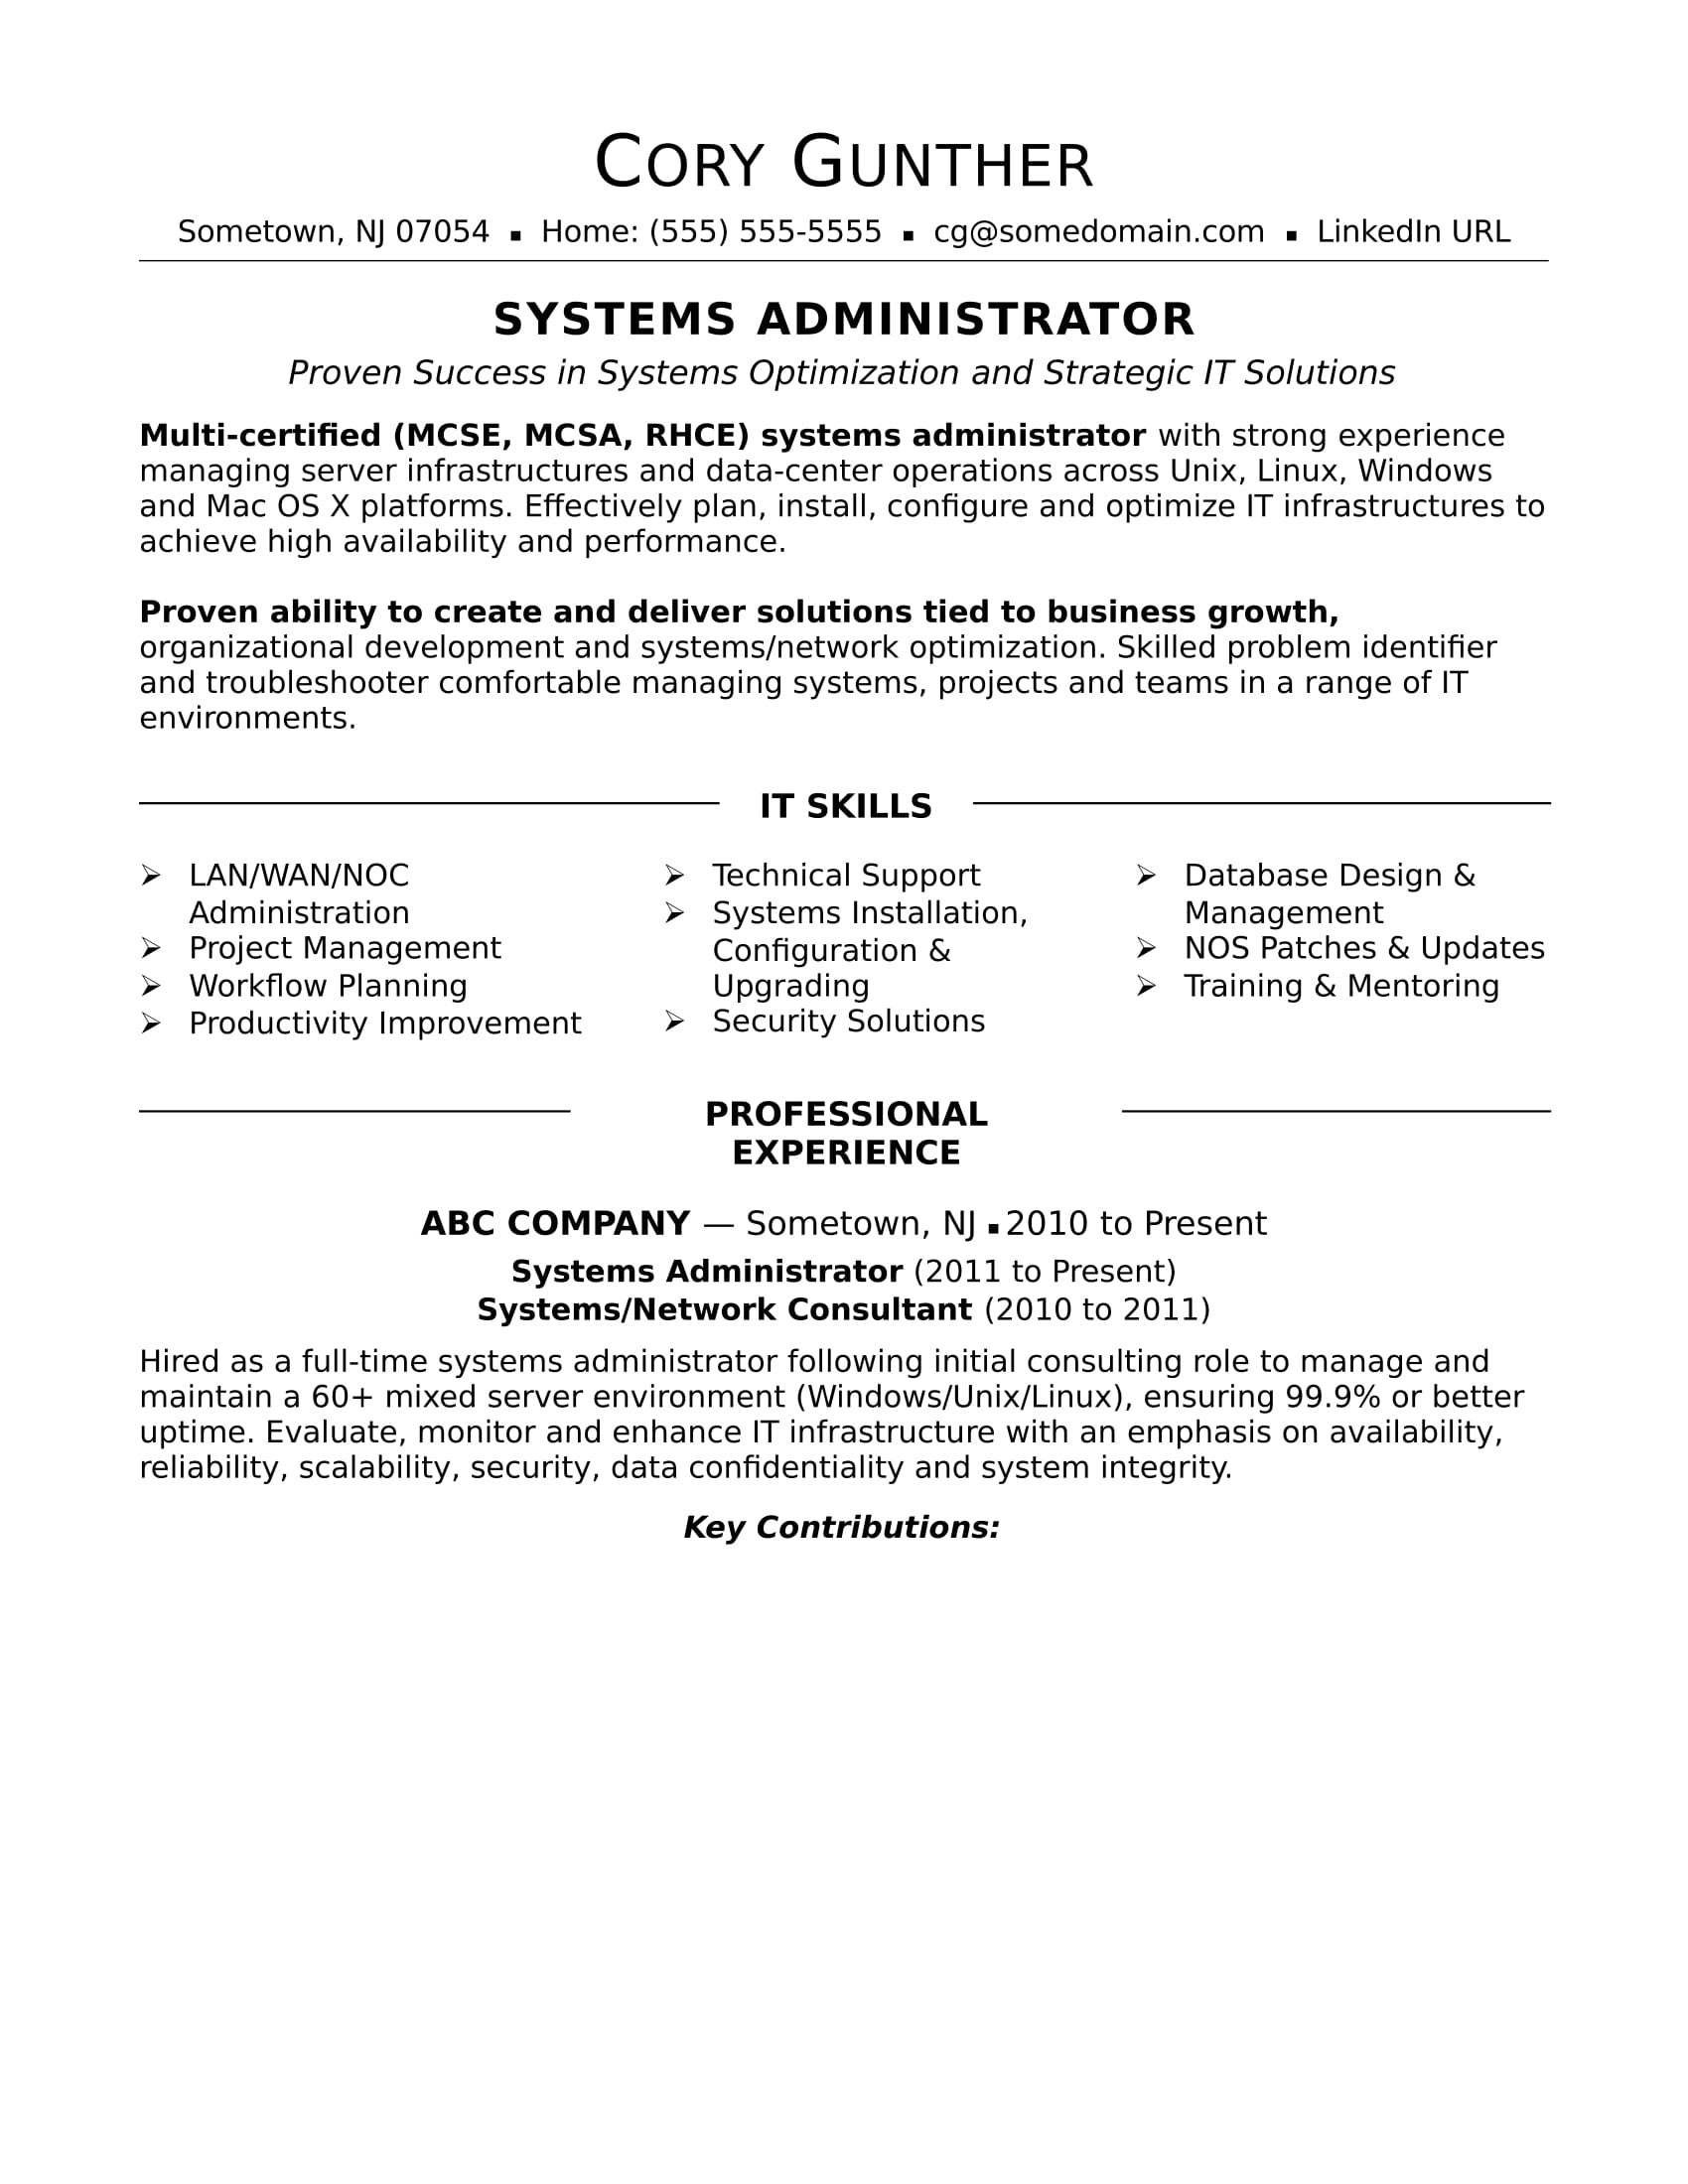 Terminal Operator Resume Sample for Entry Sample Resume for An Experienced Systems Administrator Monster.com